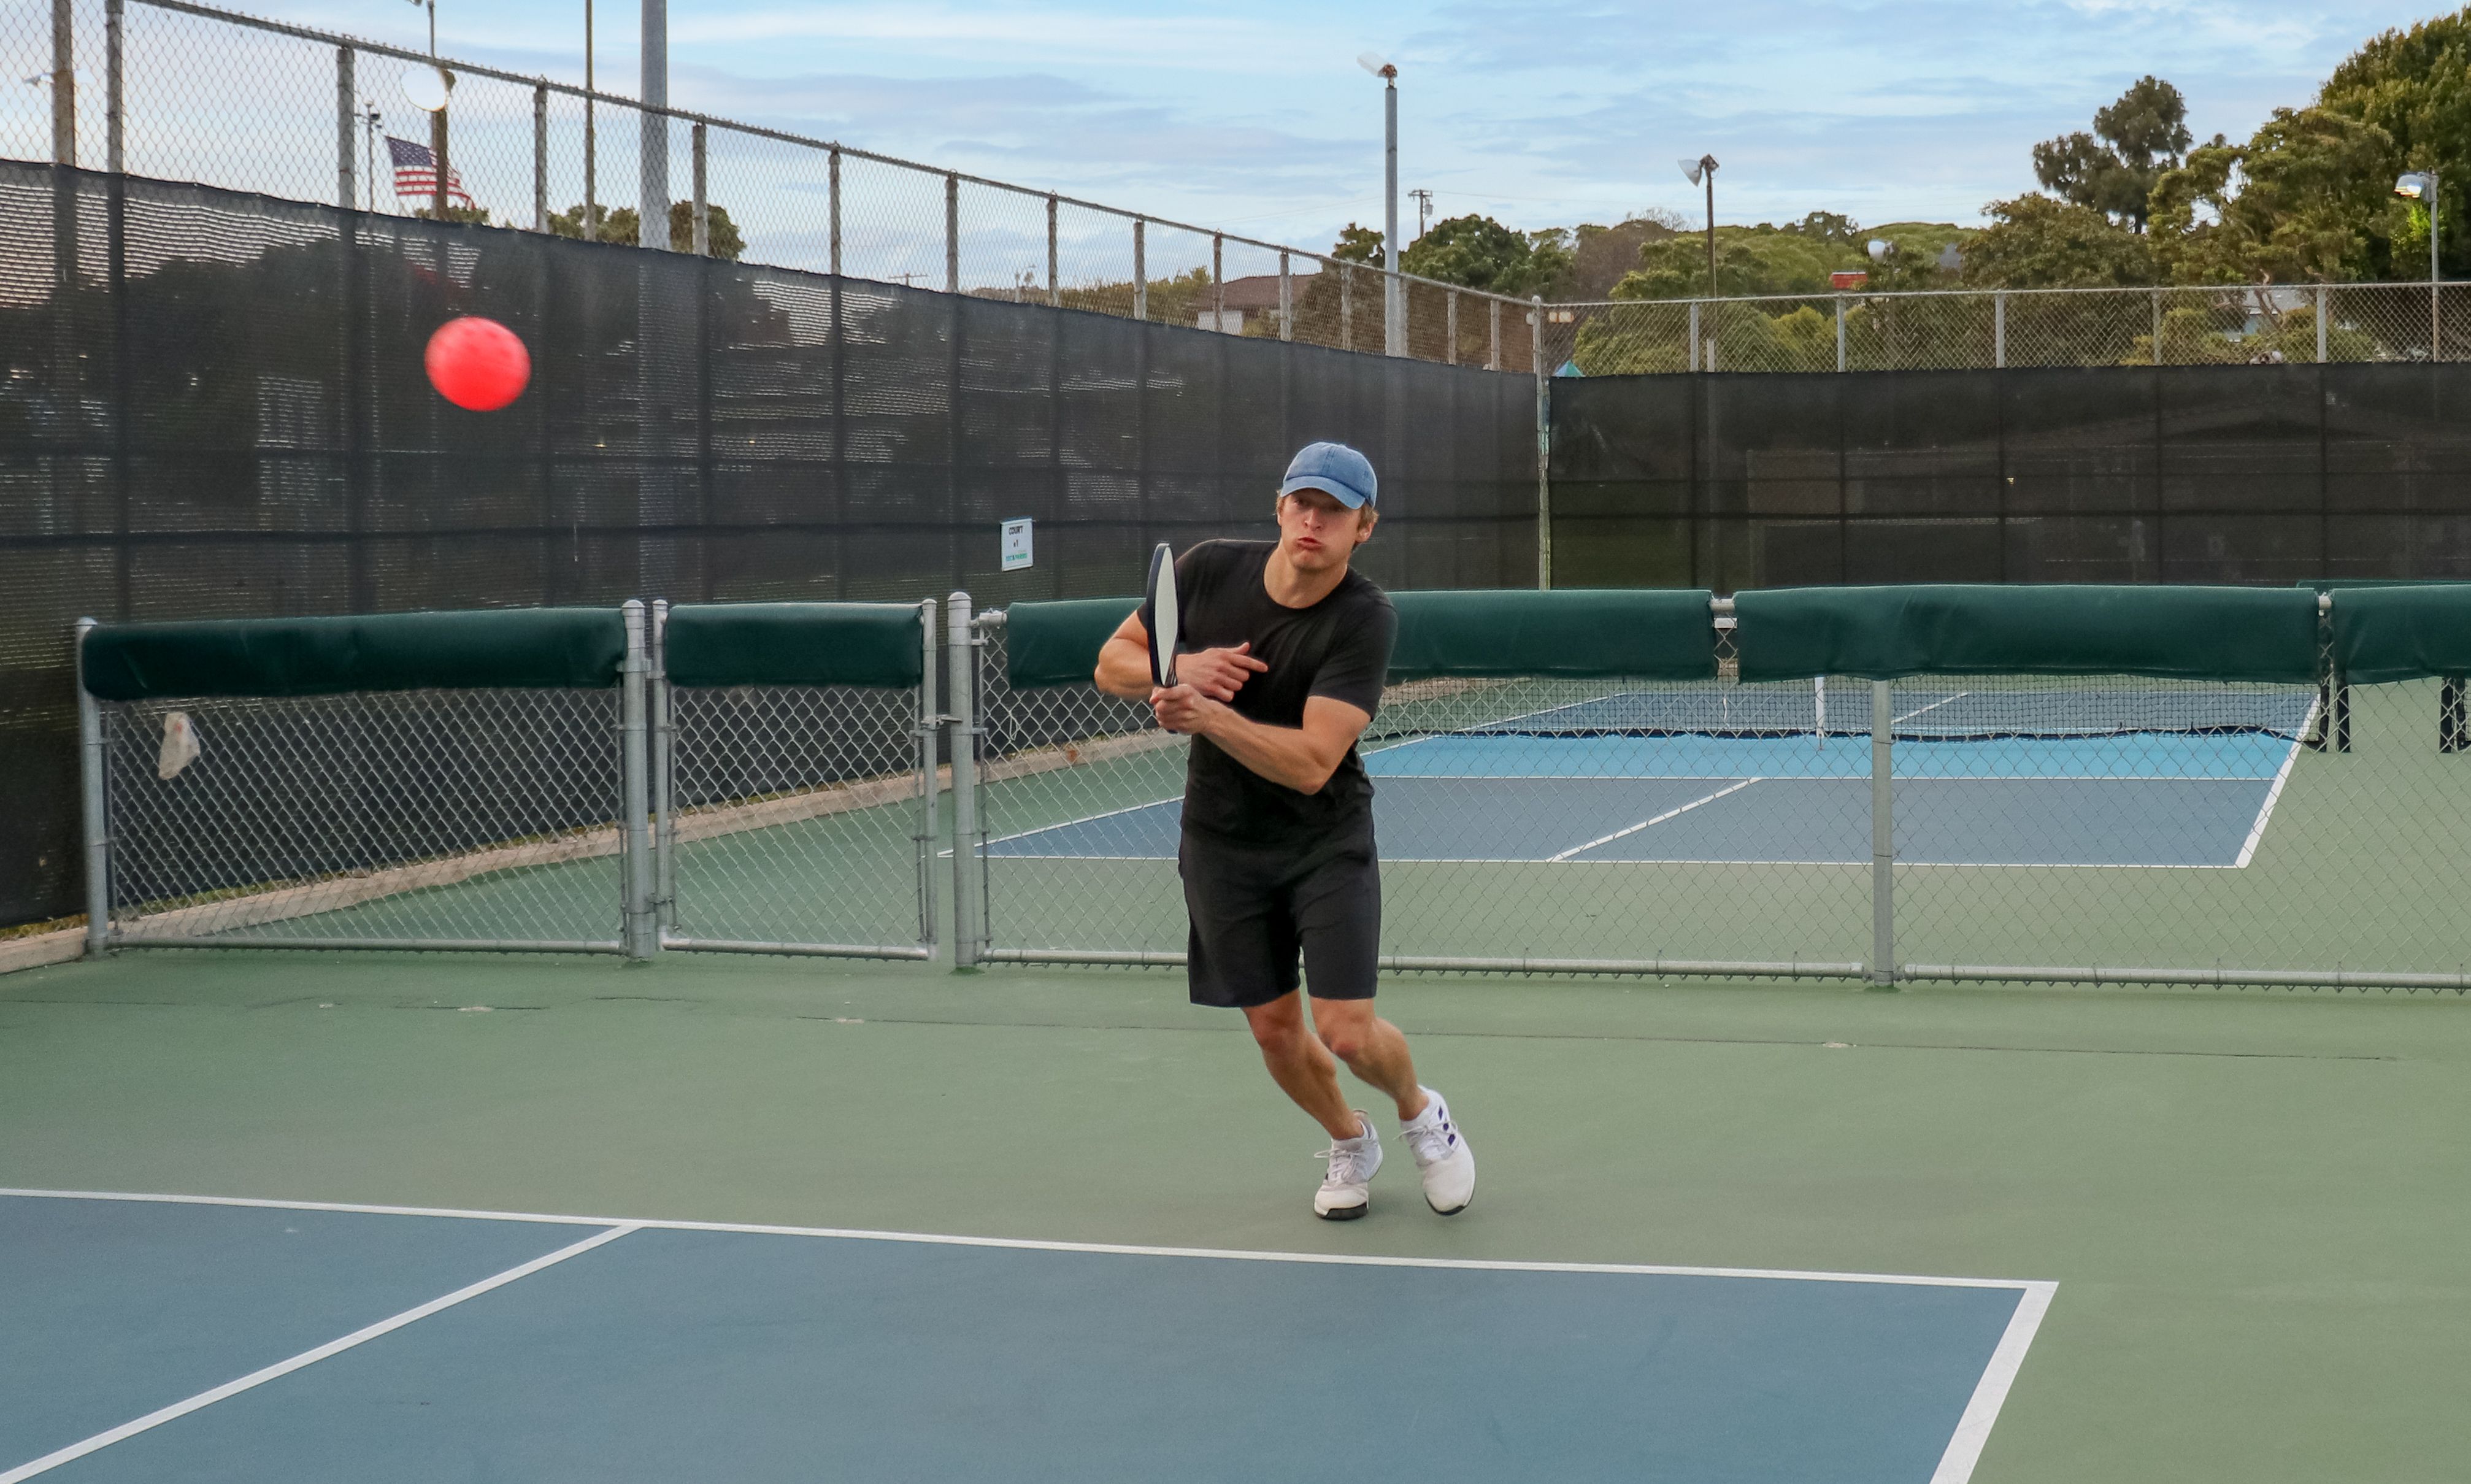 Pickleball player returning a difficult shot